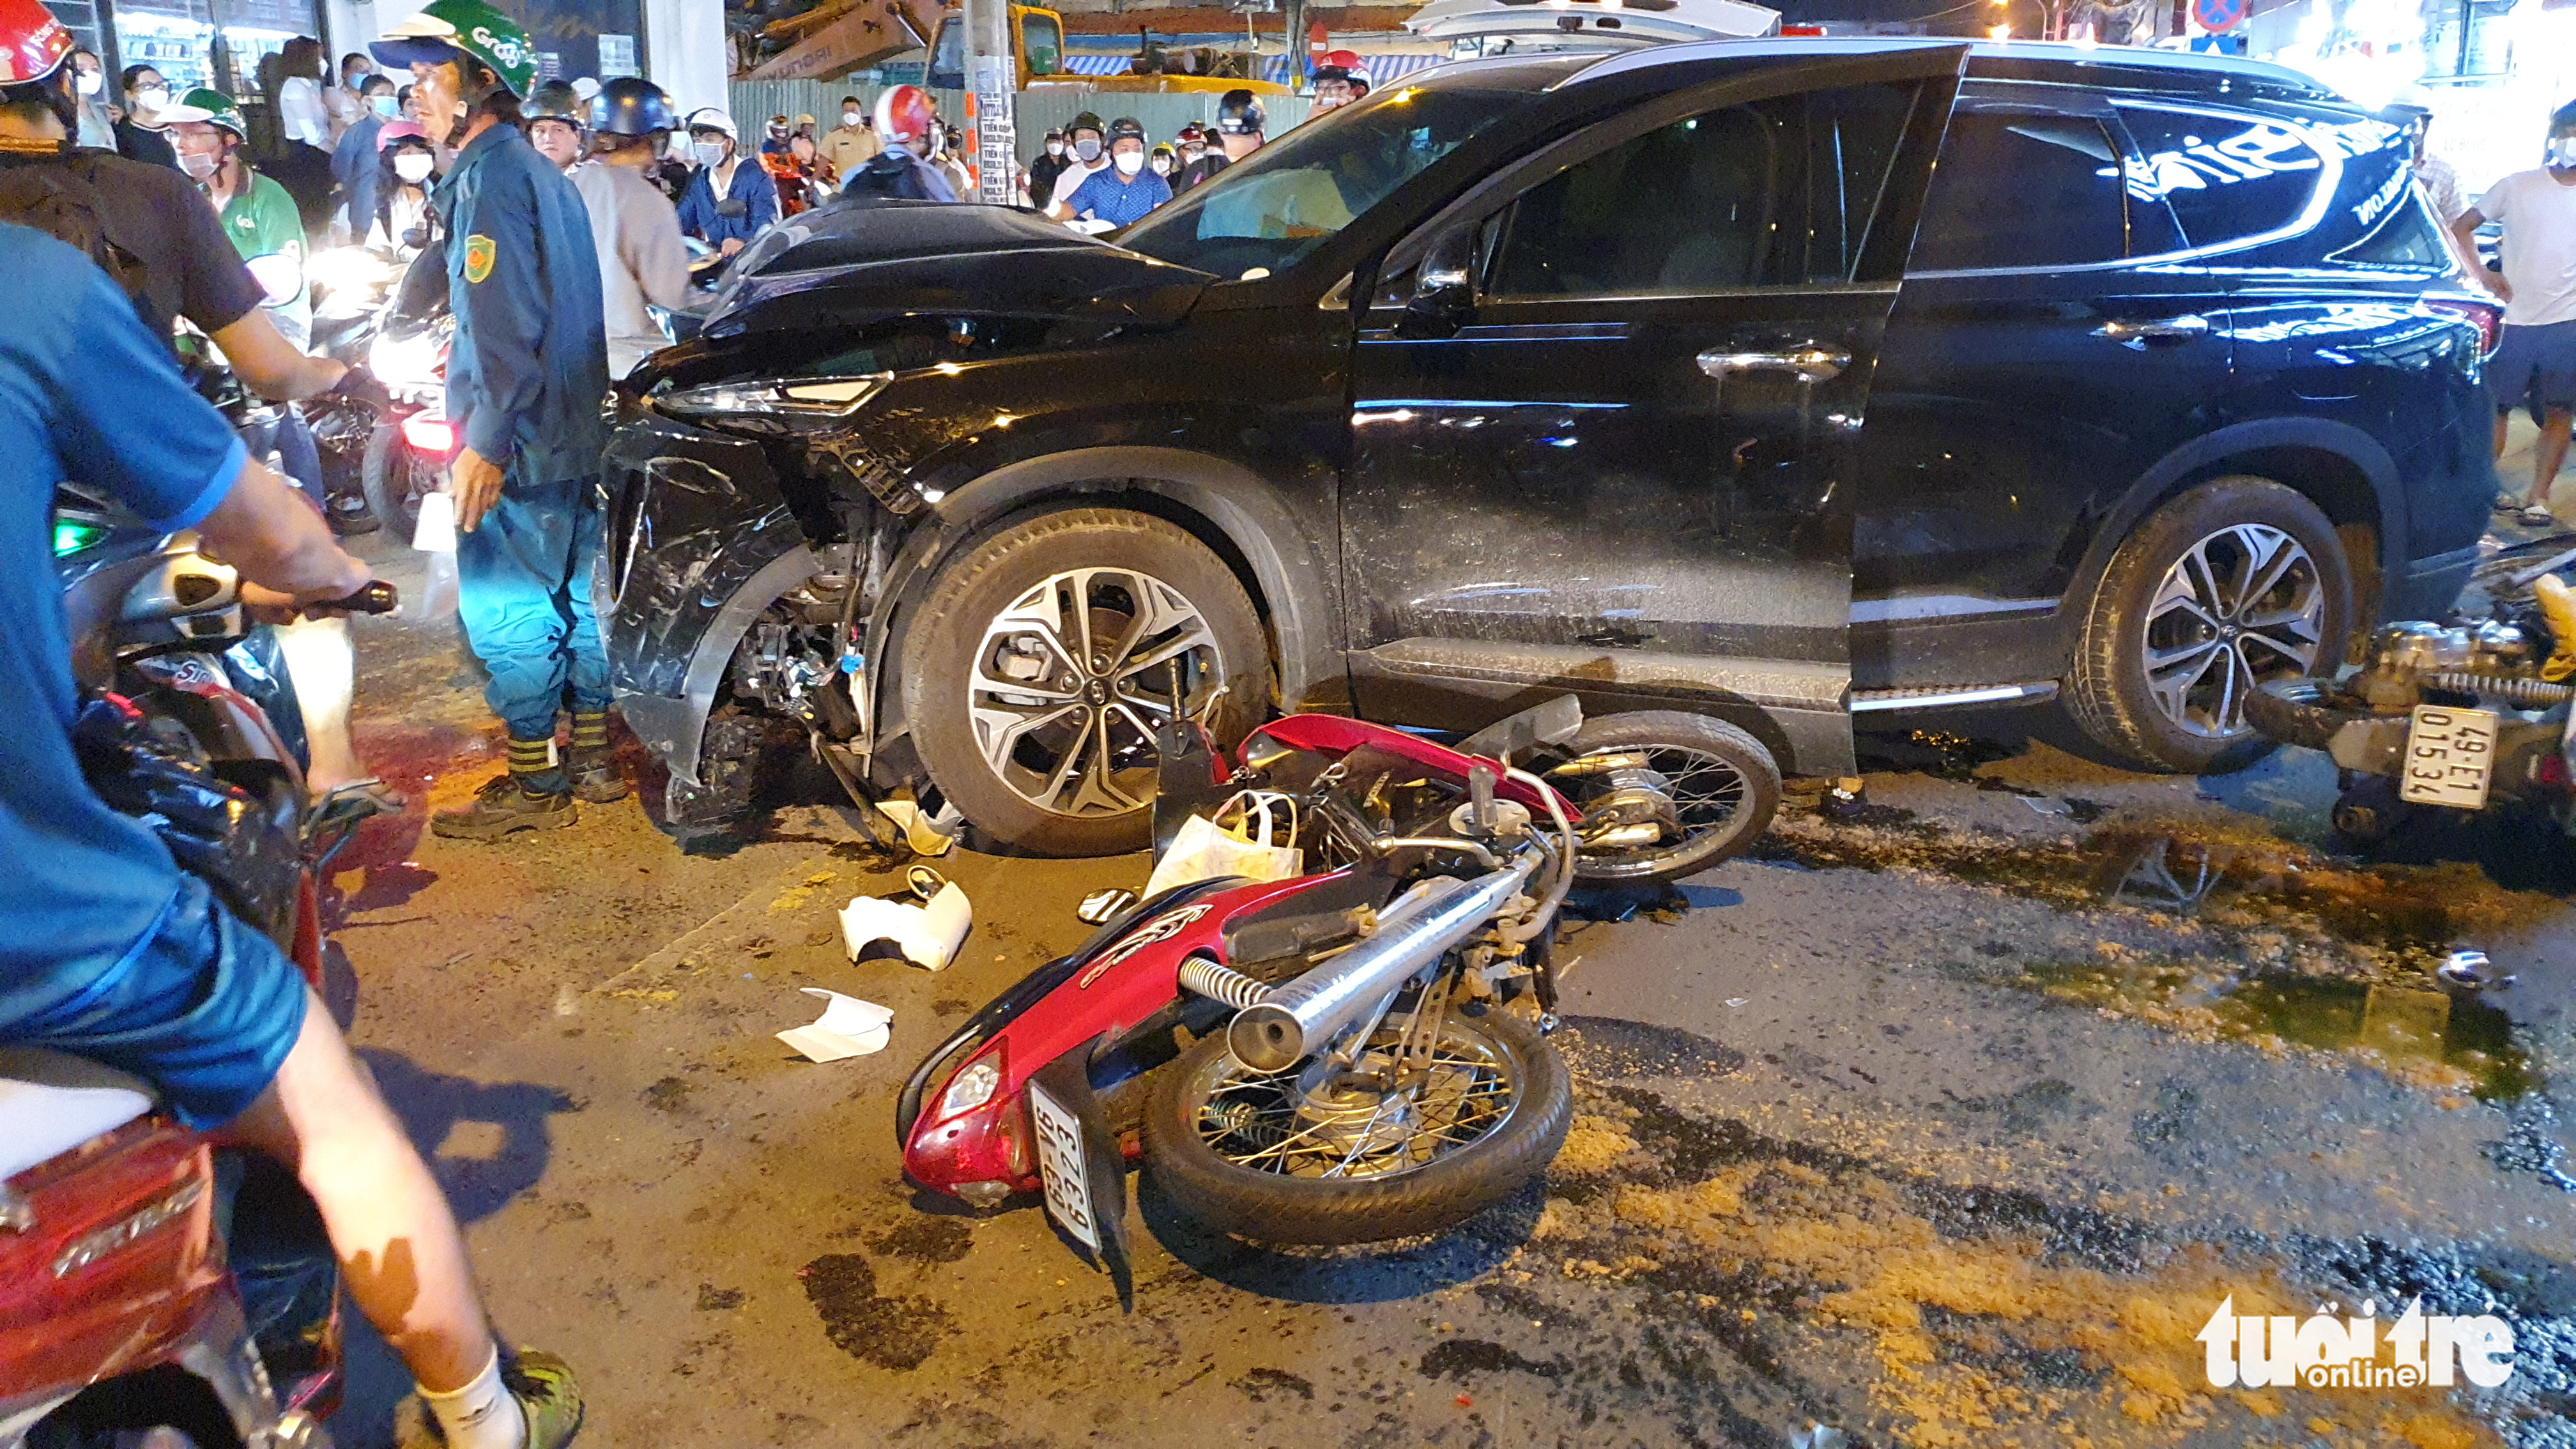 Multiple motorcycles are damaged following the crash in Thu Duc City, Ho Chi Minh City, May 5, 2022. Photo: Minh Hoa / Tuoi Tre